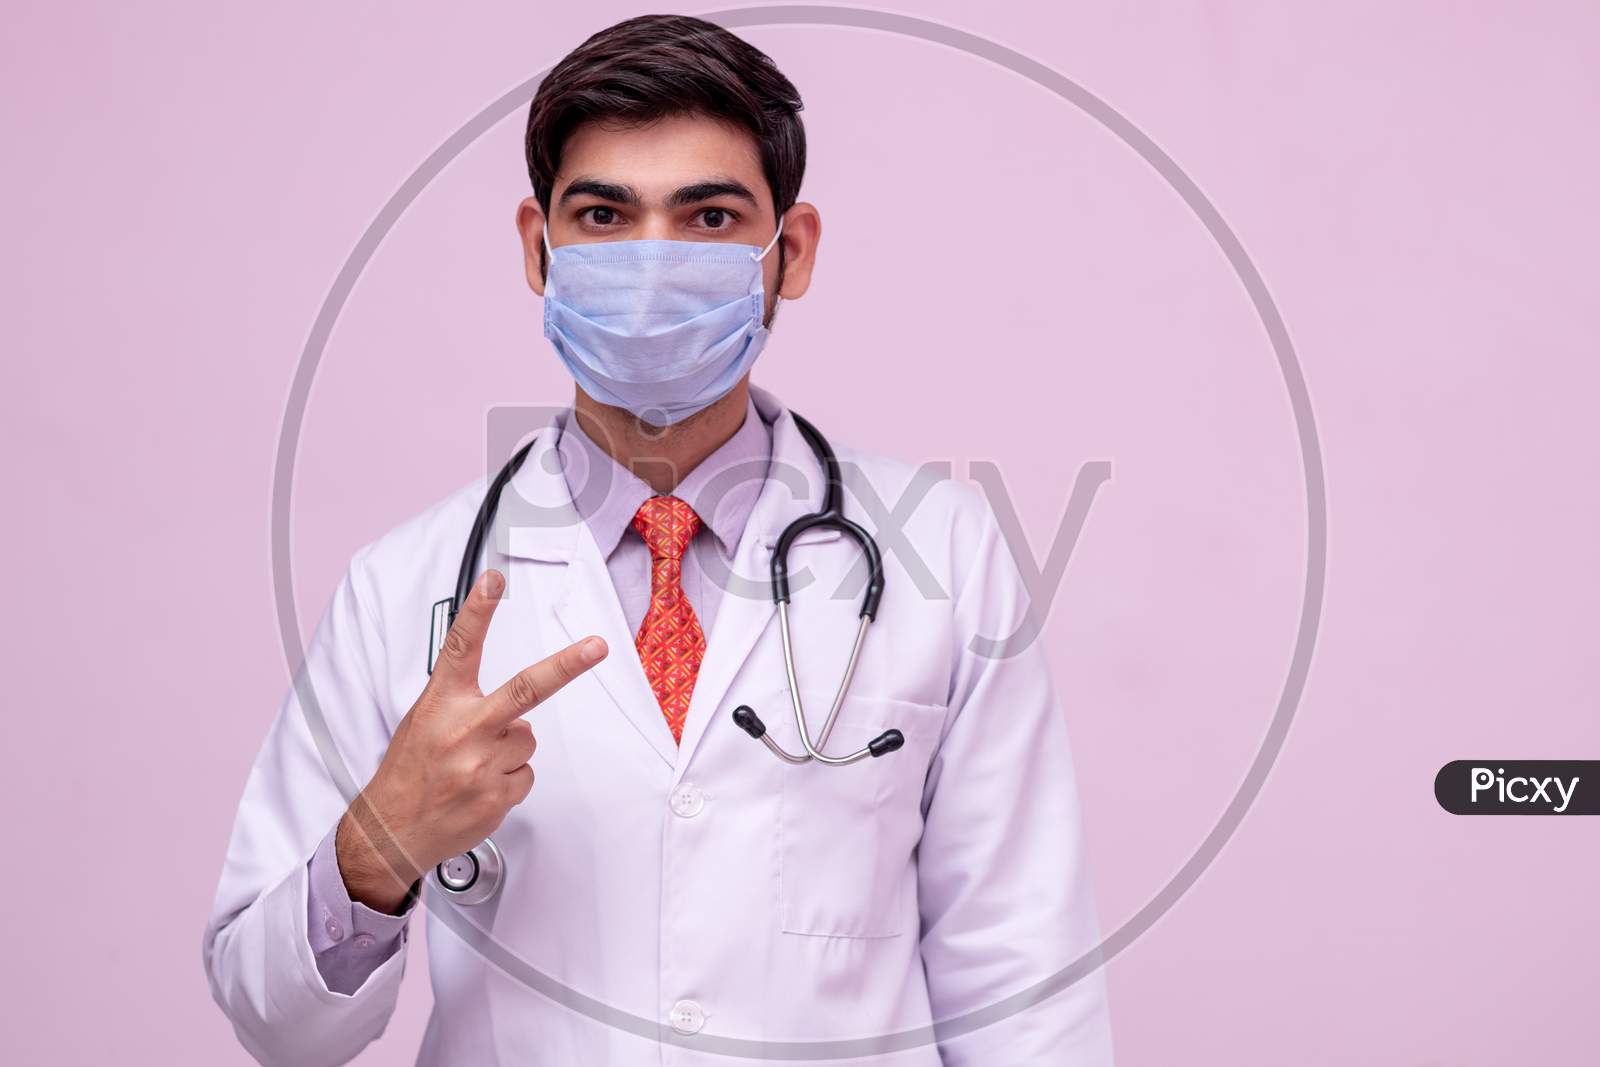 Doctor Wearing Medical Mask Showing Victory With Hand On Isolated Background.